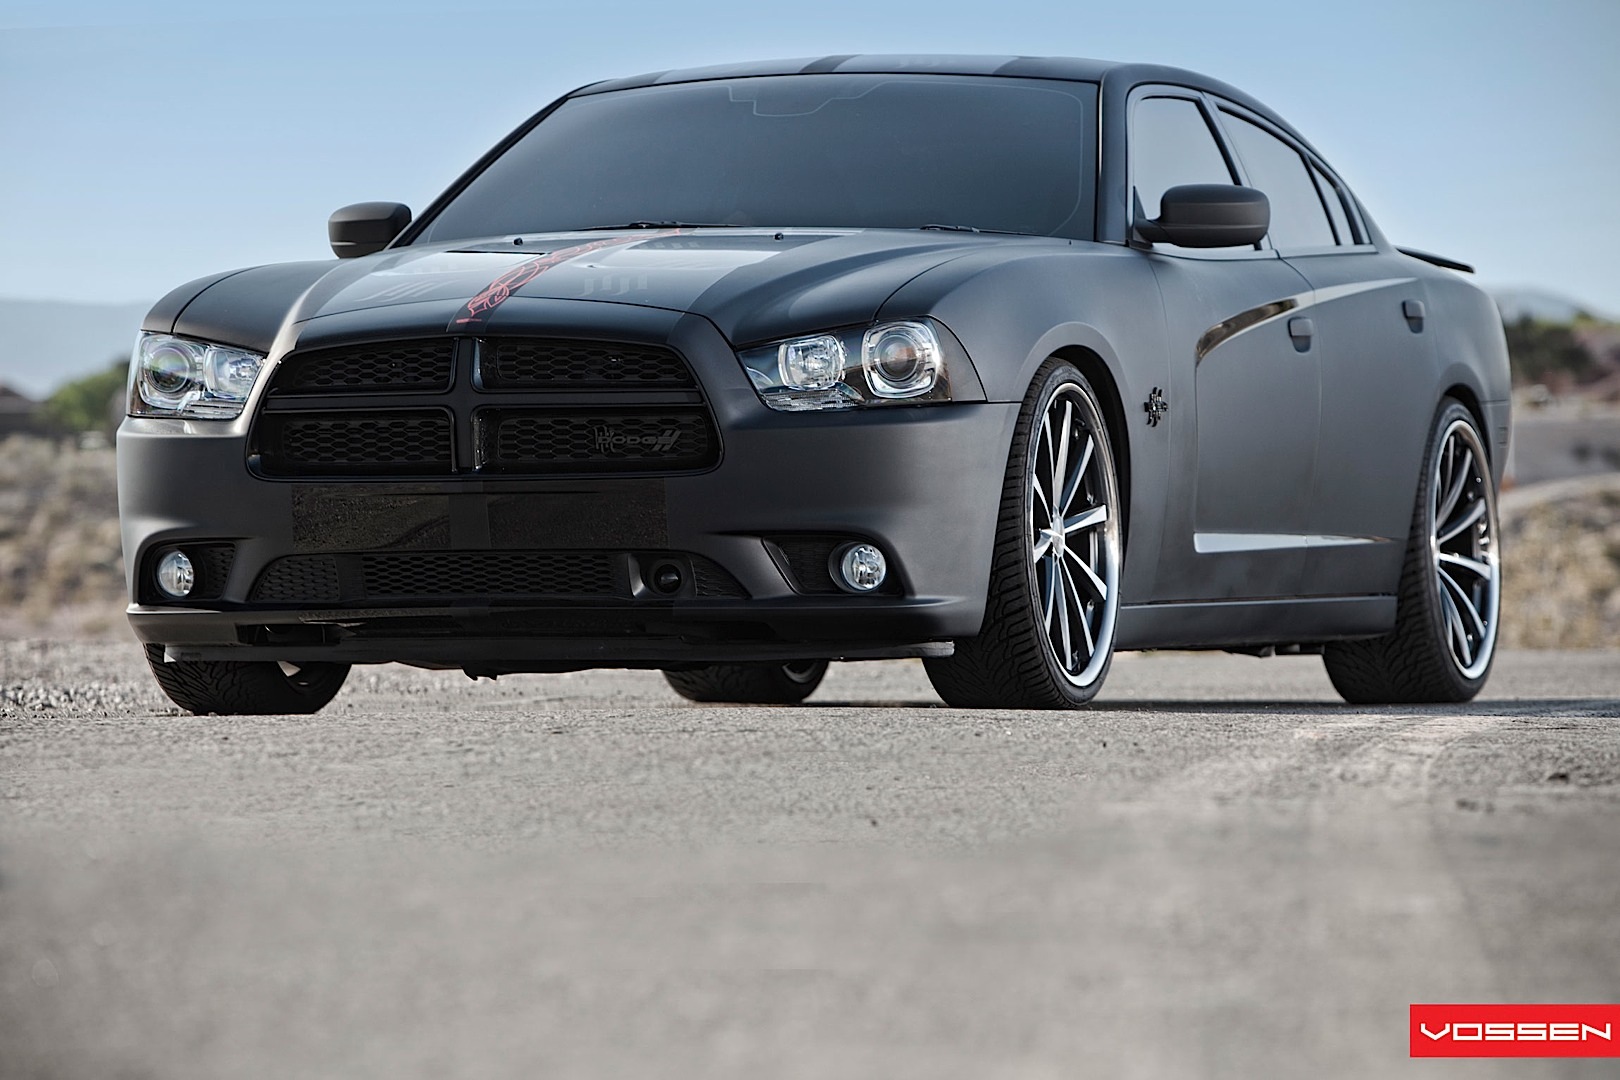 dodge-charger-gets-matte-black-wrap-and-vossen-wheels-photo-gallery_6.jpg